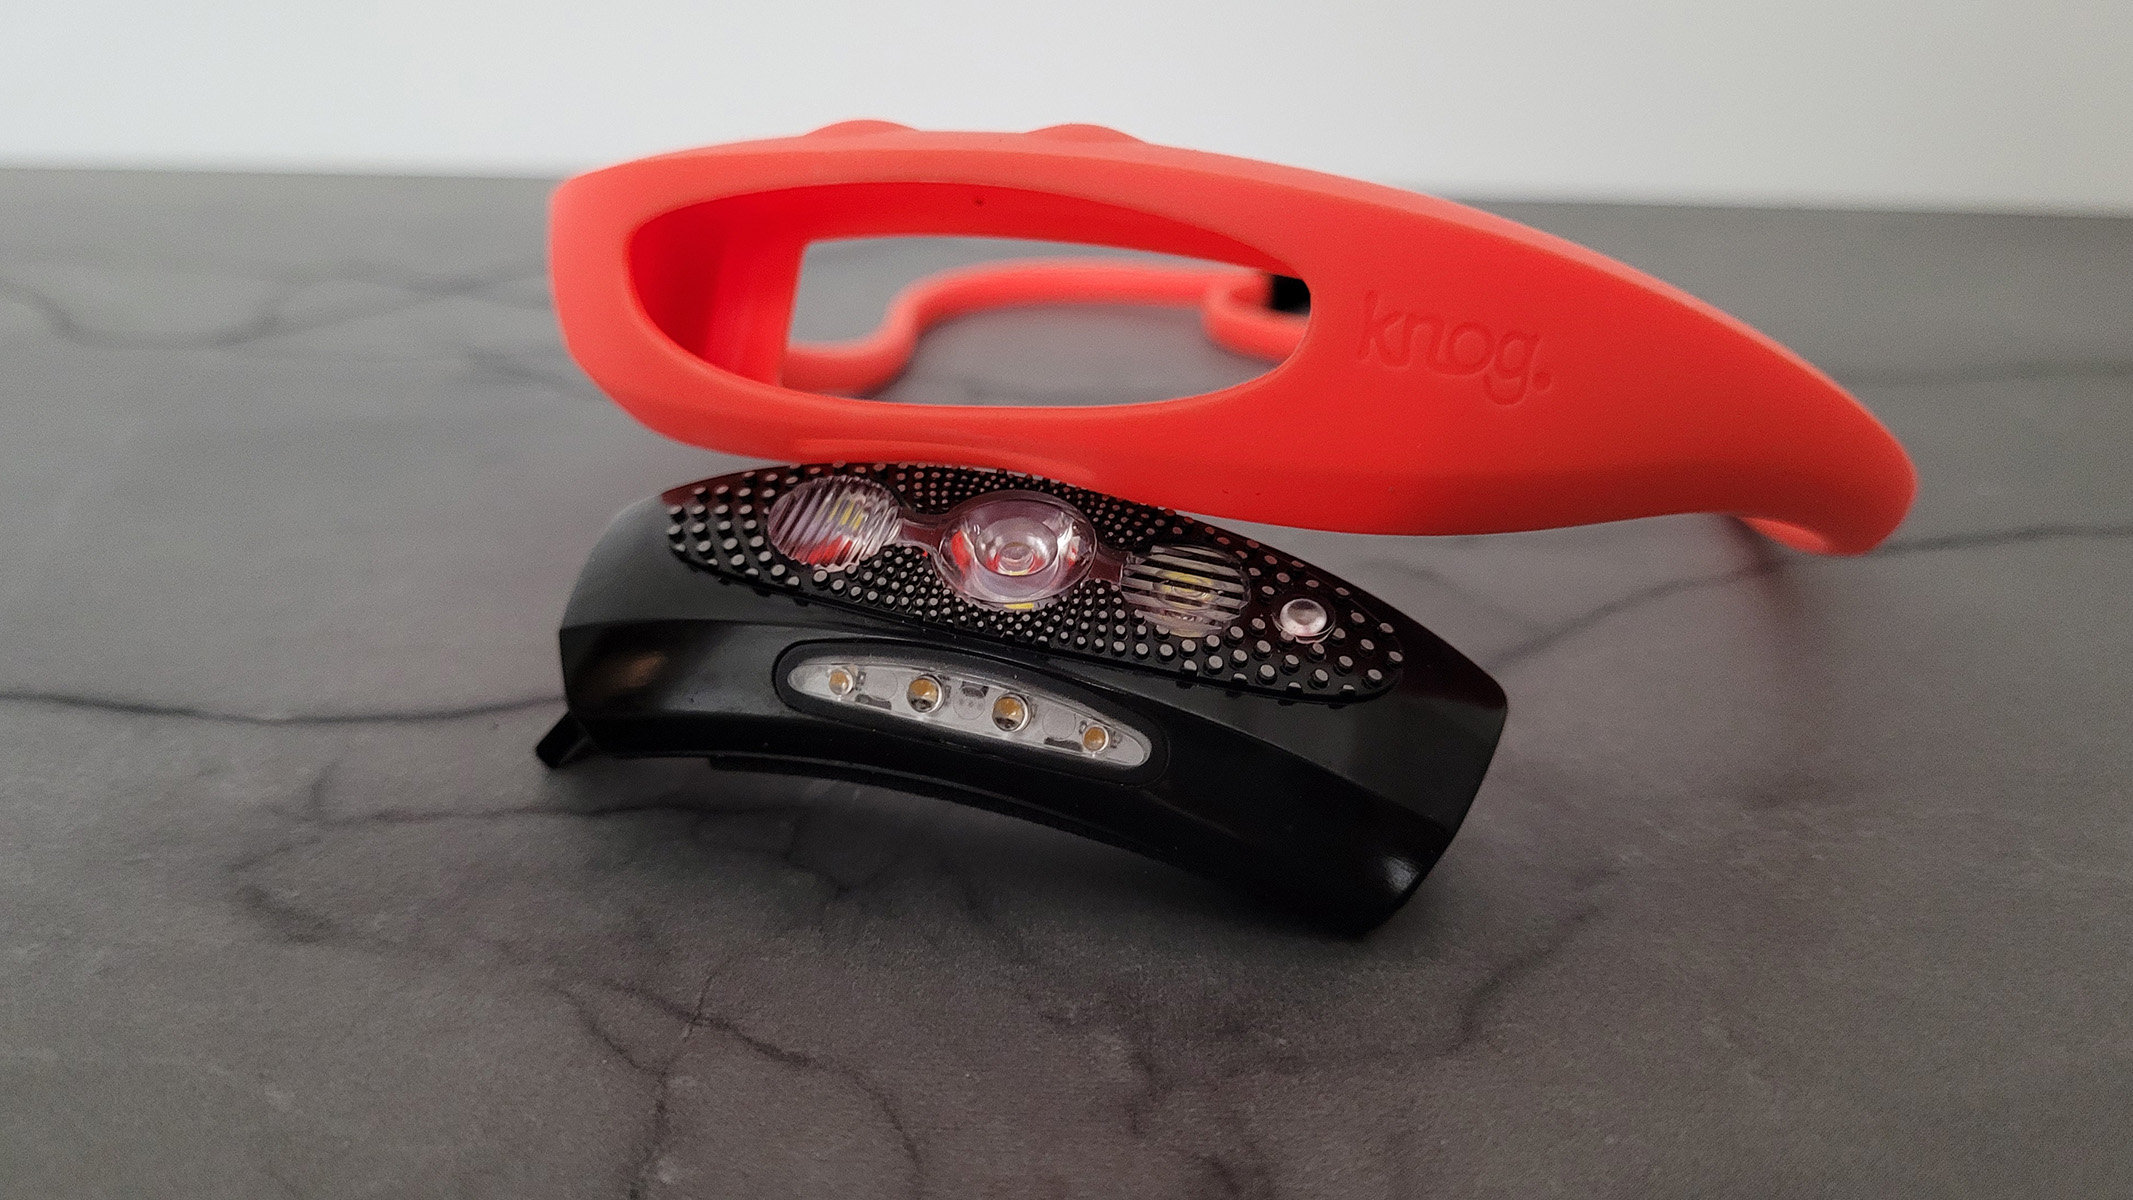 Review image of the Knog Bilby its accompanying light pod.